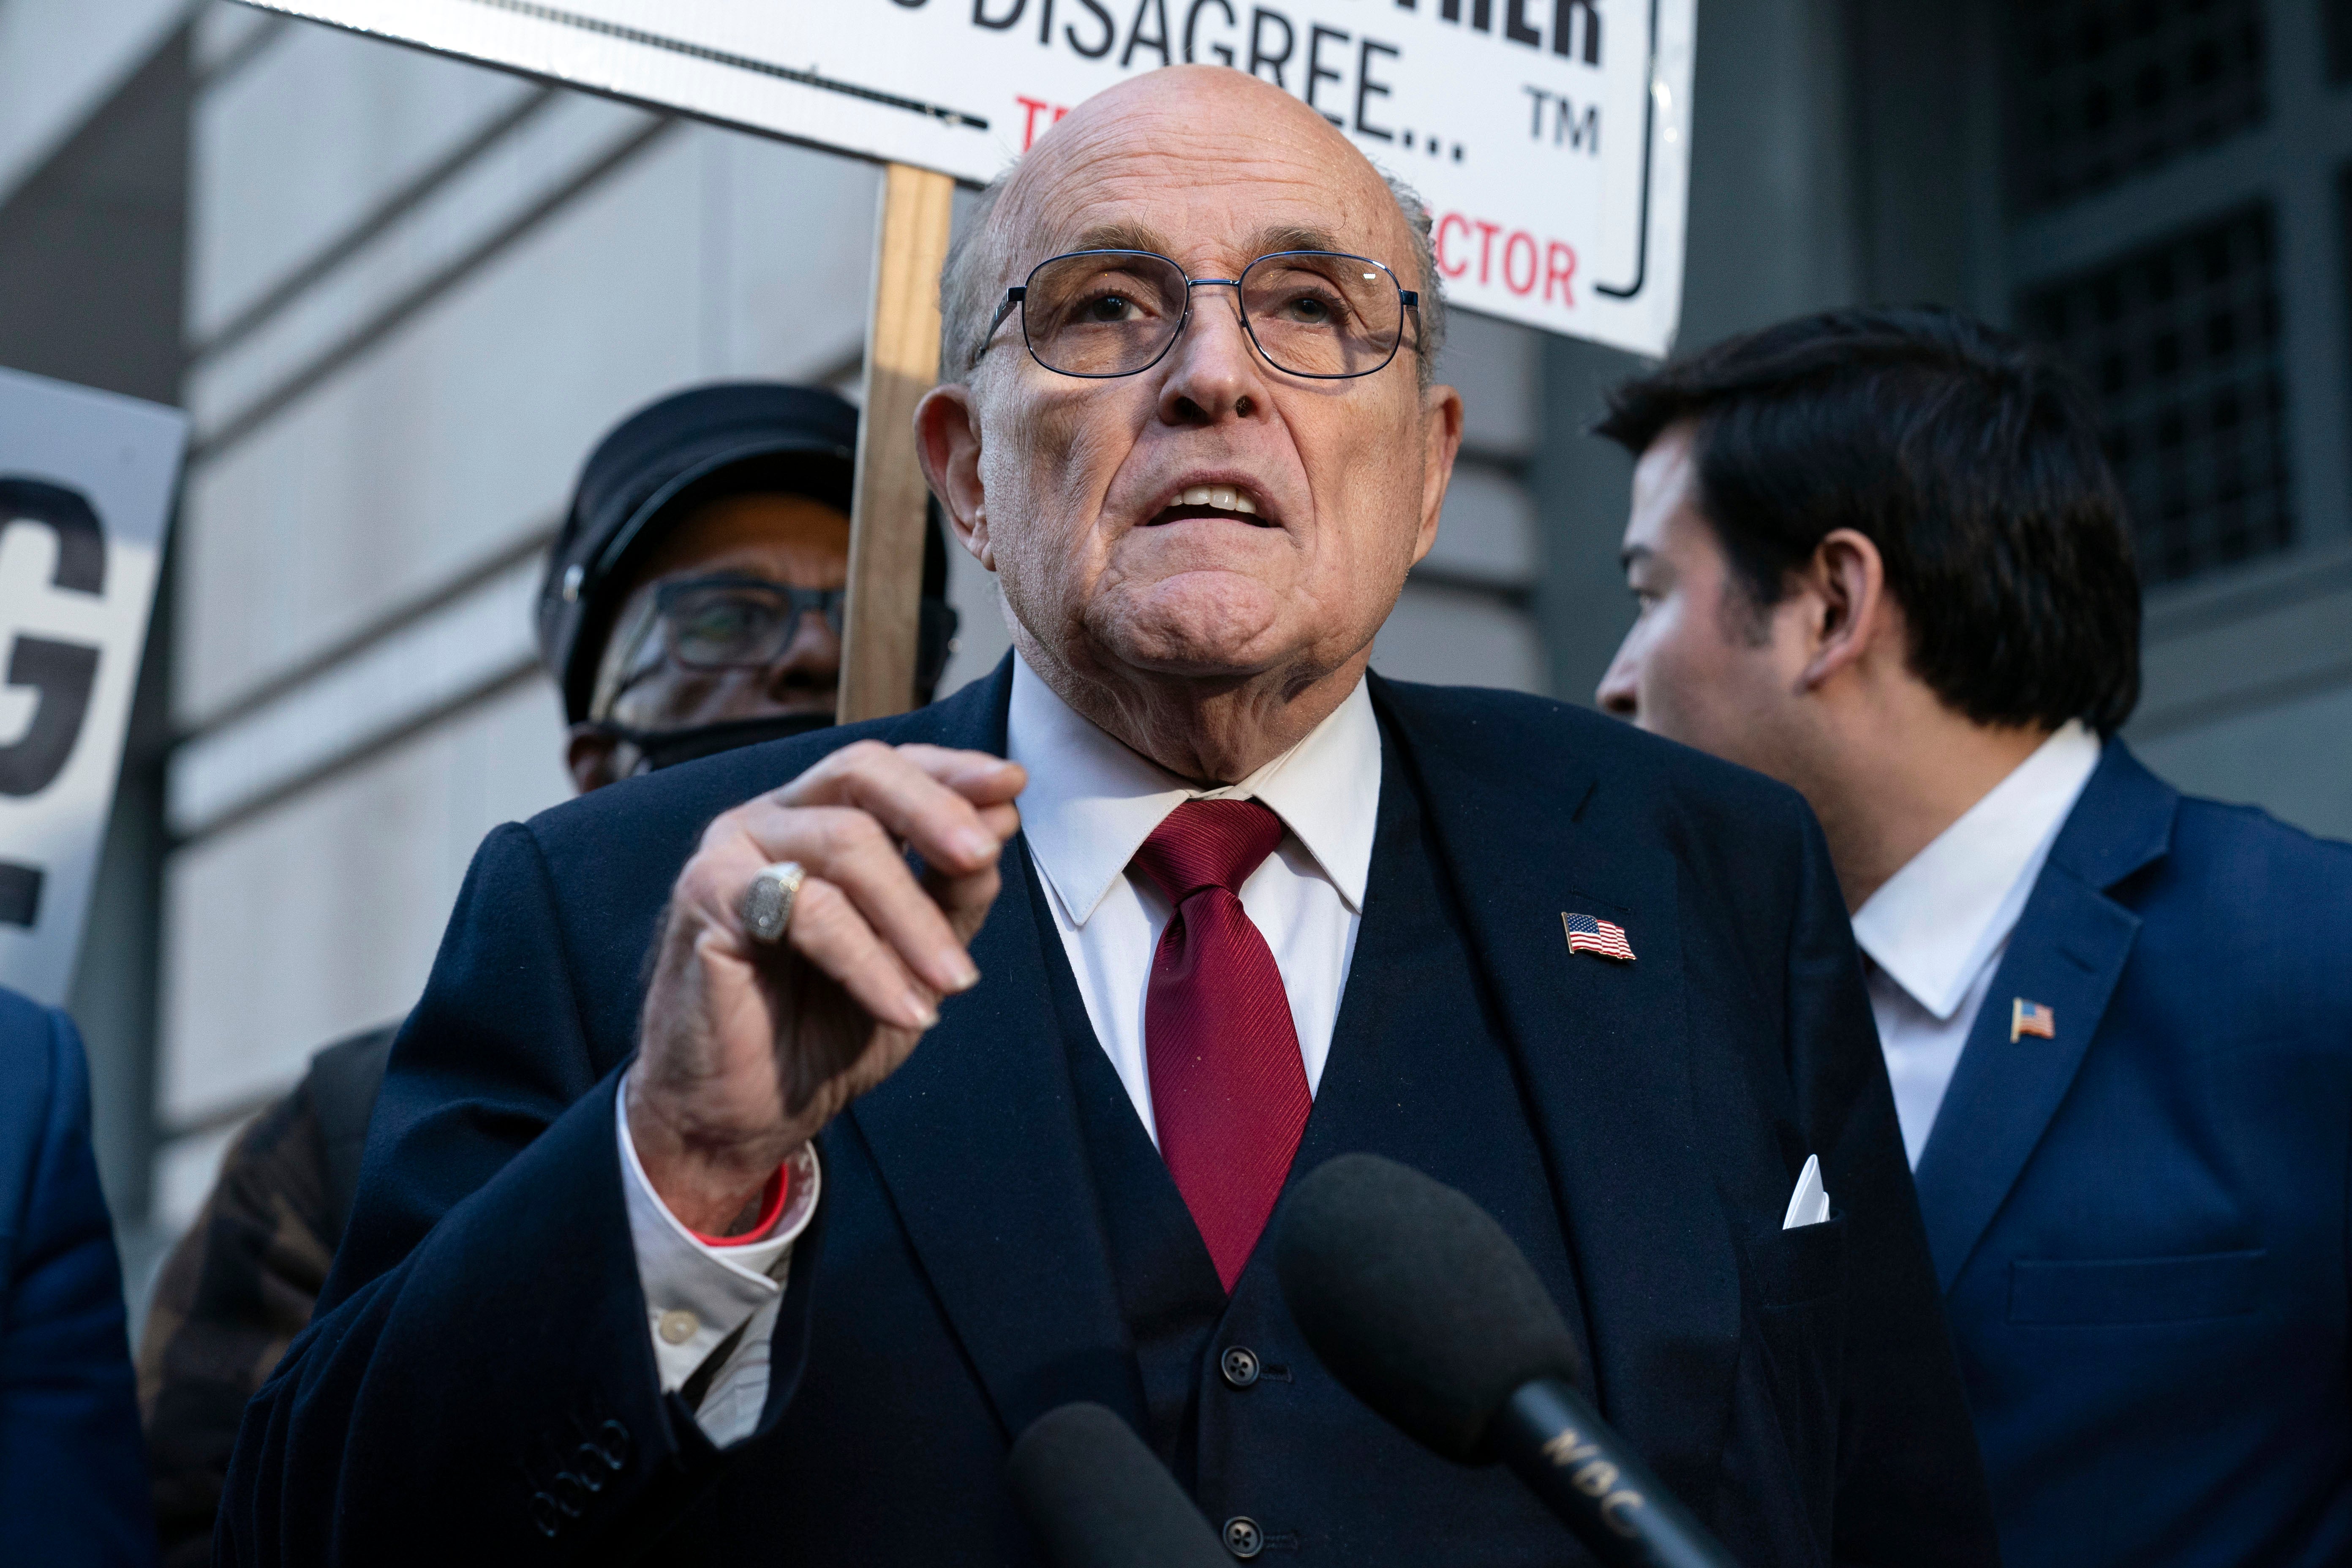 Former mayor of New York Rudy Giuliani speaks during a news conference outside the federal courthouse in Washington on 15 December 2023